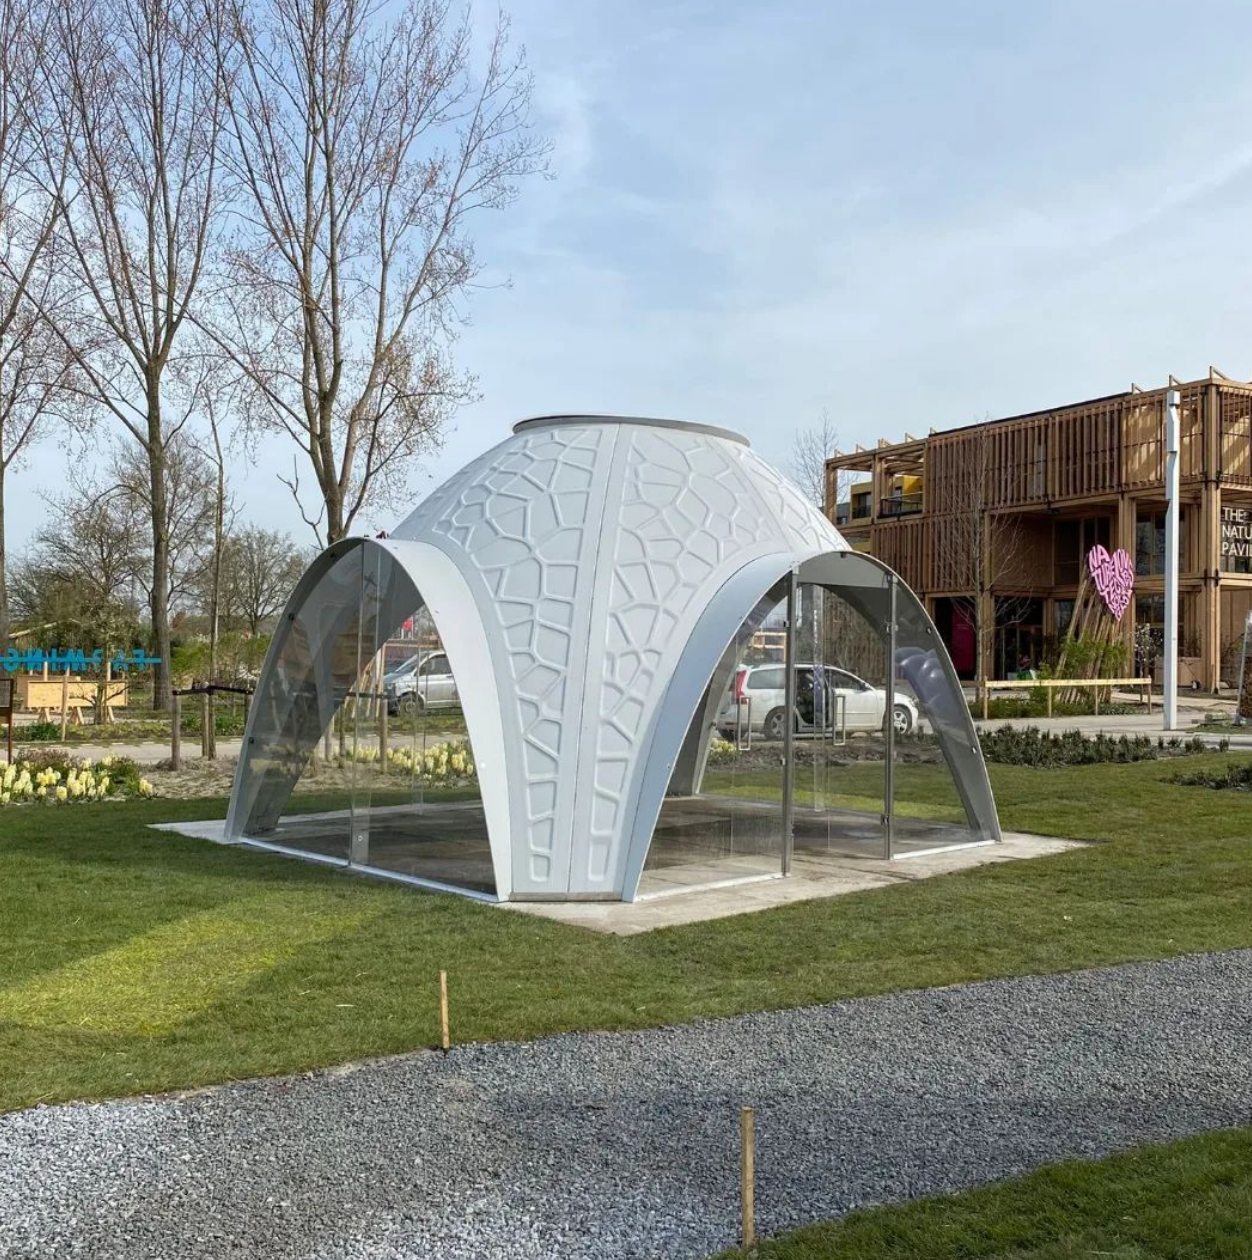 The R-Iglo 3D printed structure at the Floriade Expo 2022.